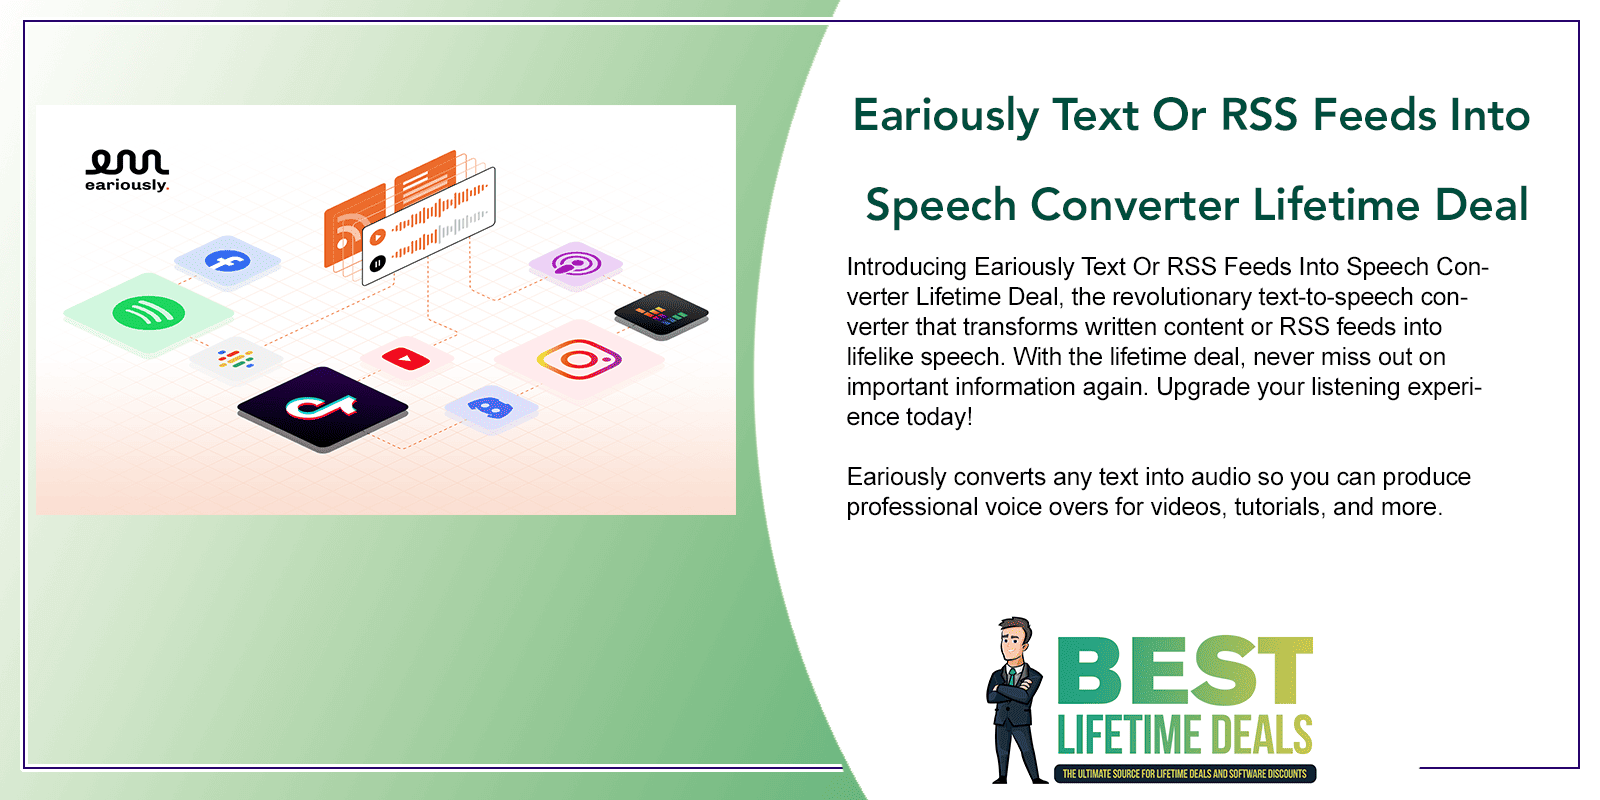 Eariously Text Or RSS Feeds Into Speech Converter Lifetime Deal Featured Image